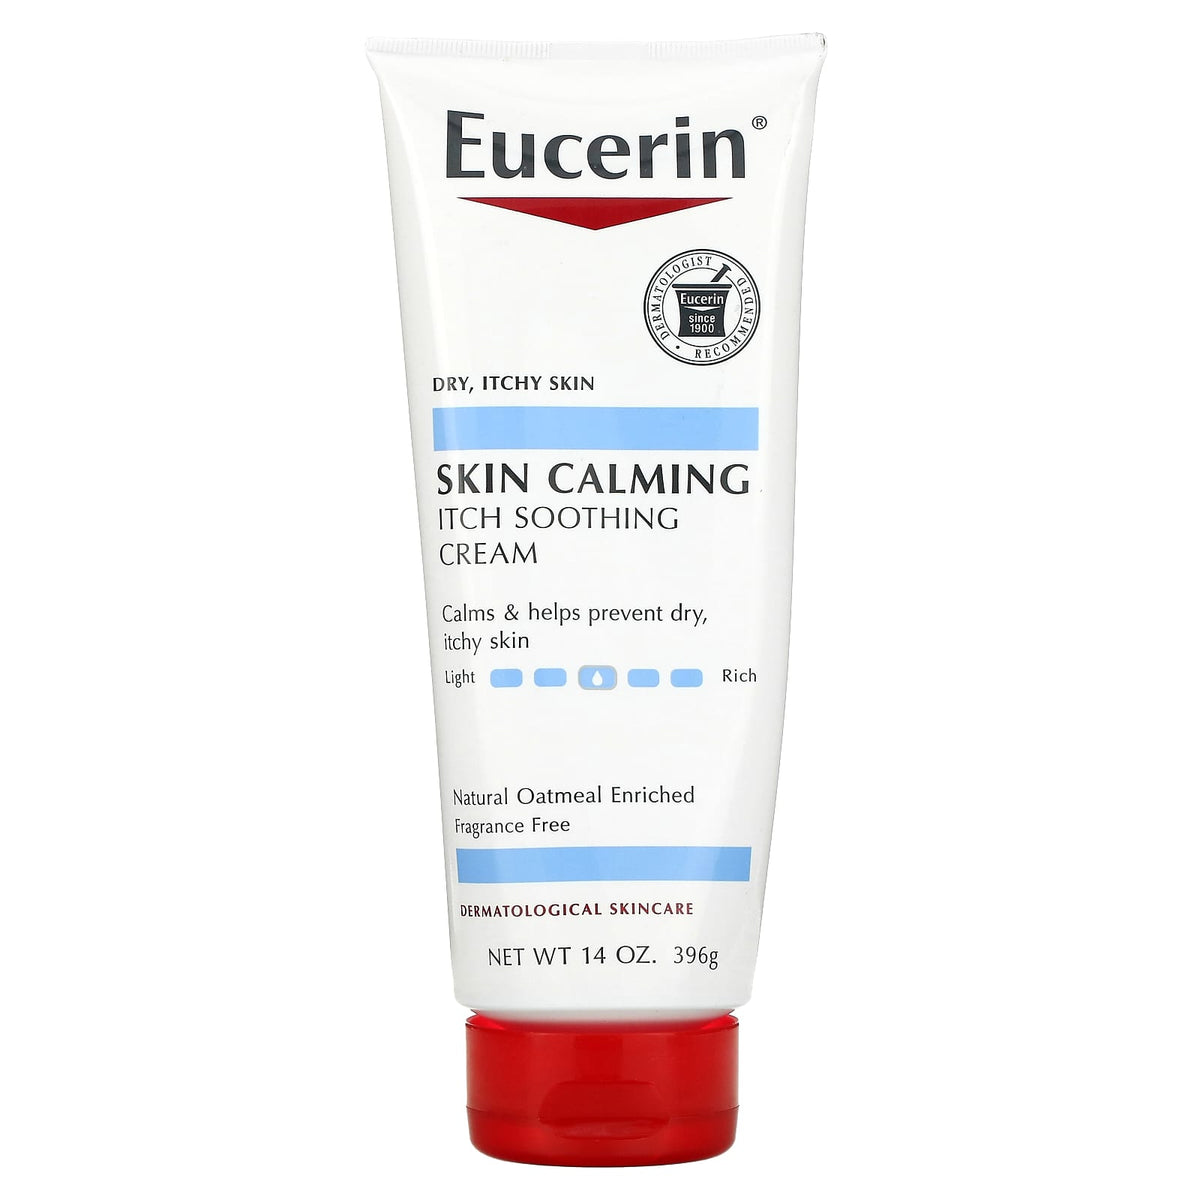 Eucerin, Skin Calming Itch Soothing Cream (396g) Eucerin